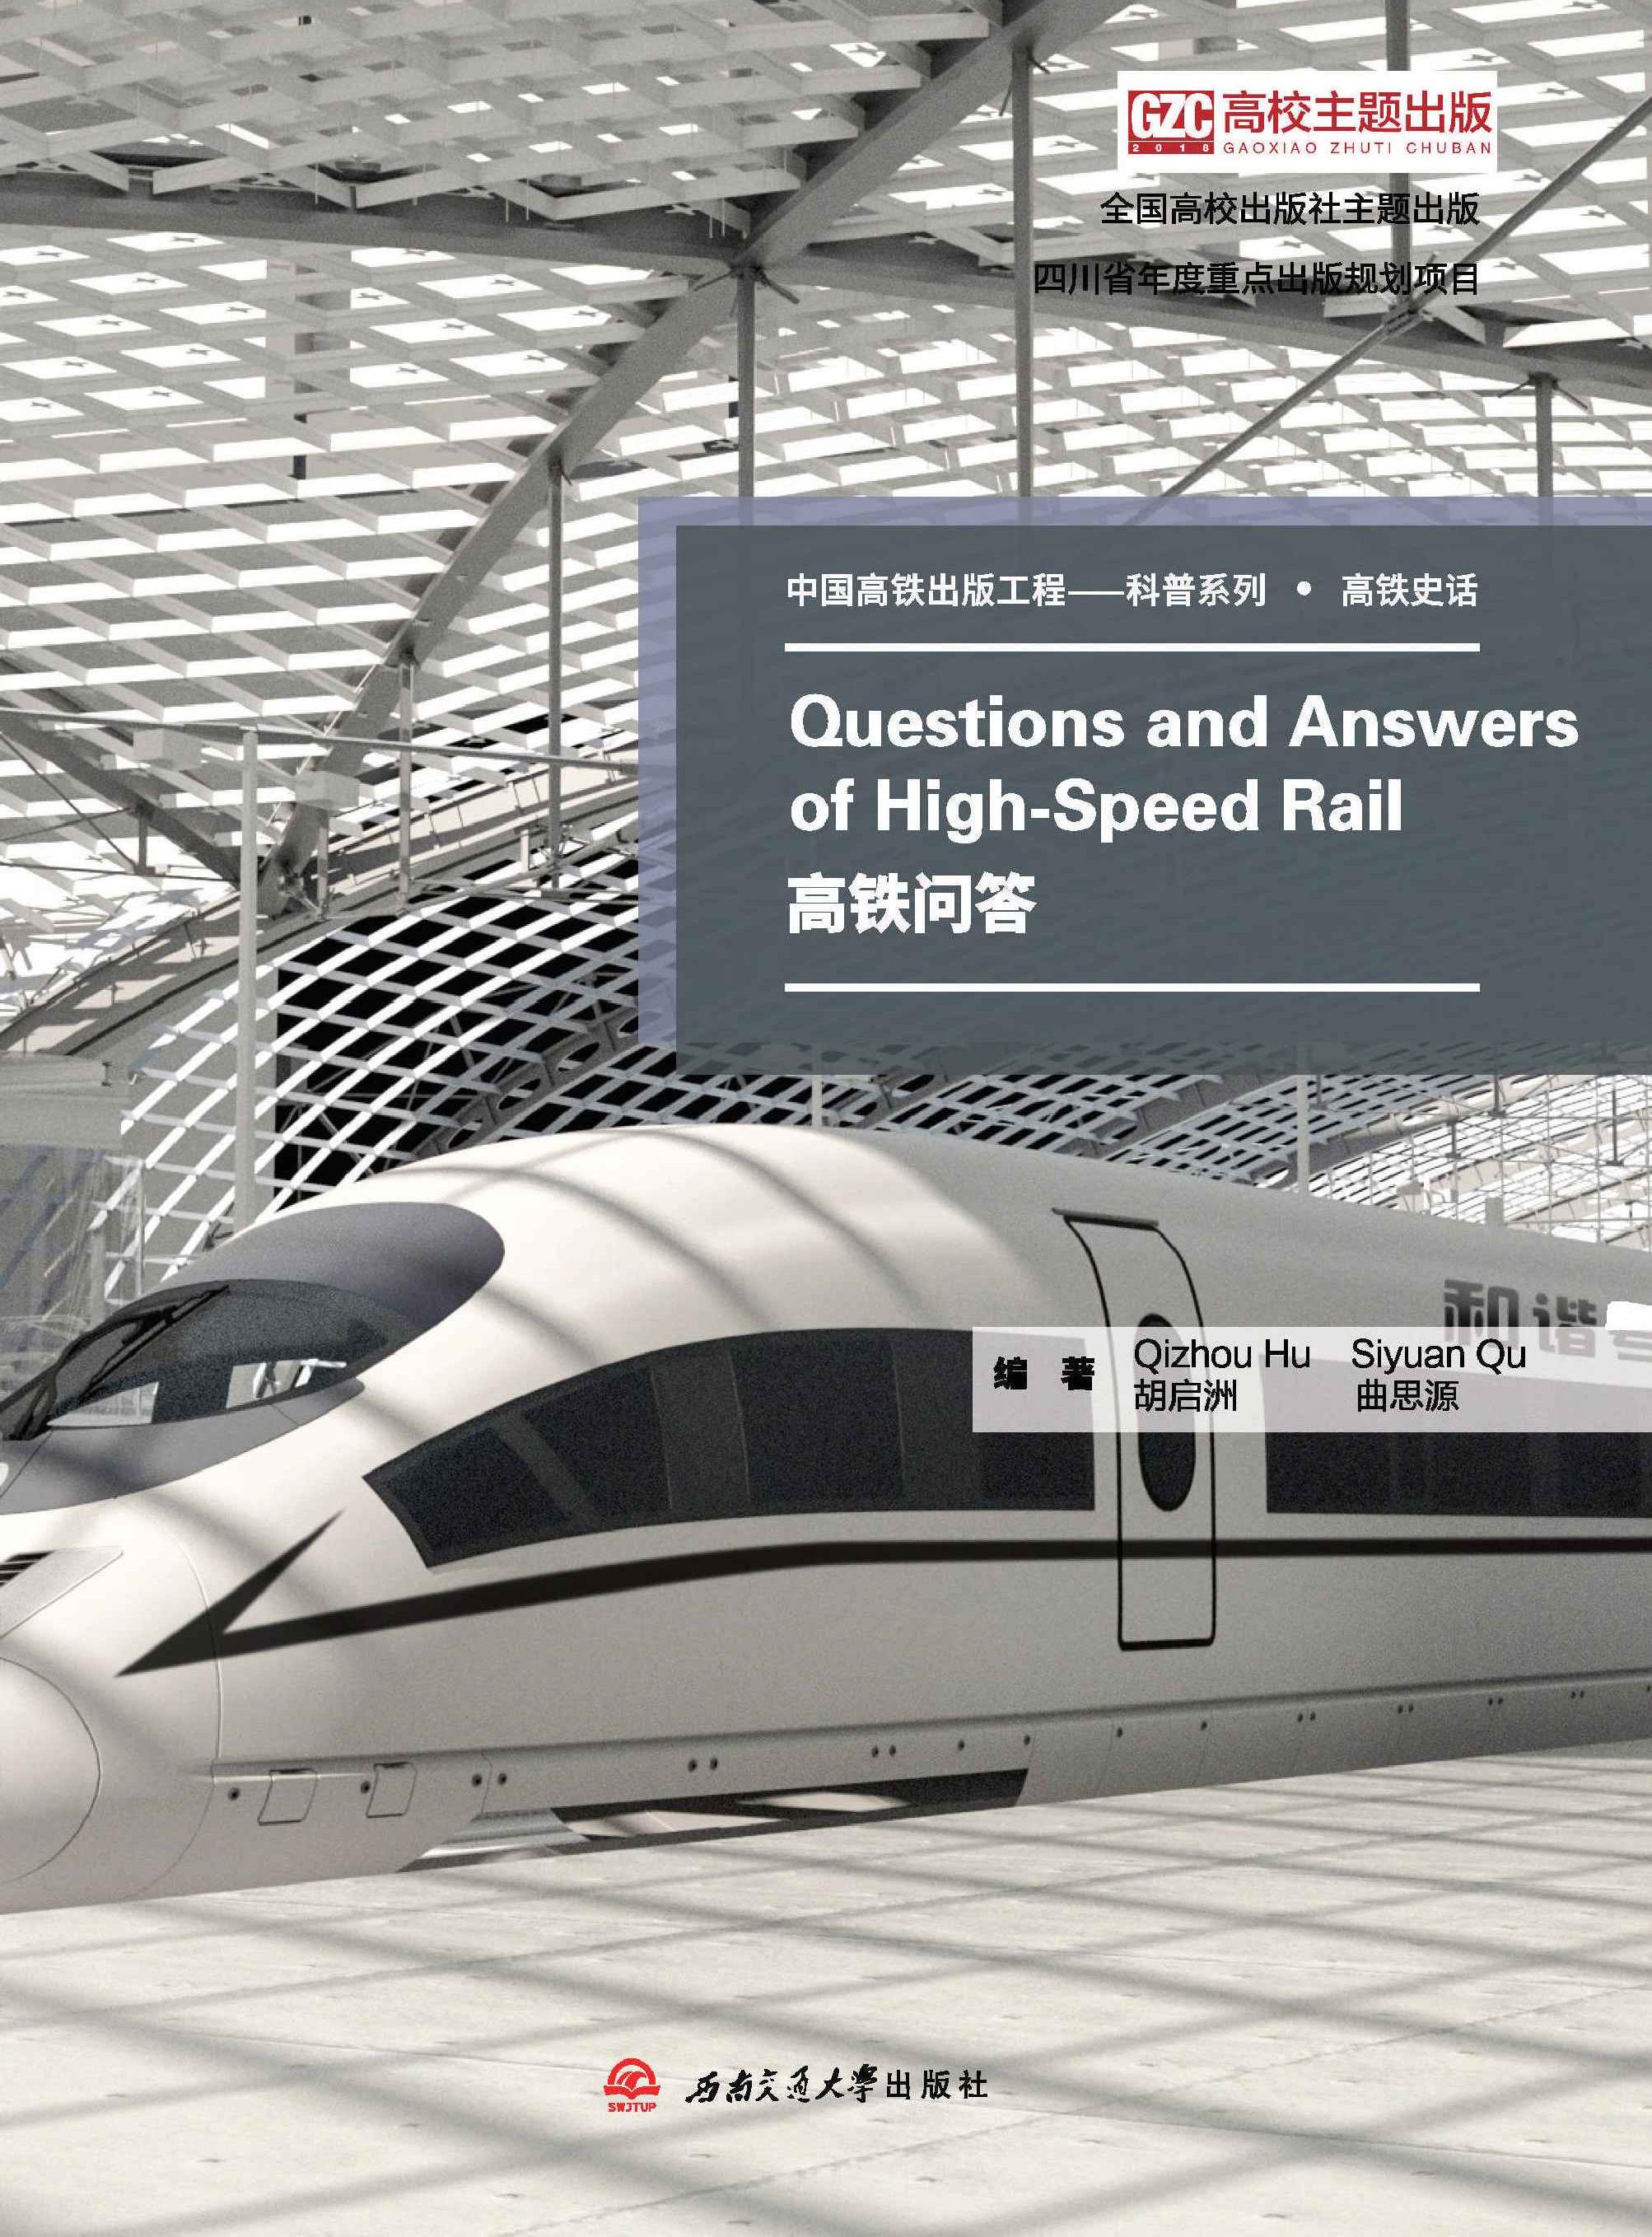 Questions and Answers of High-Speed Rail